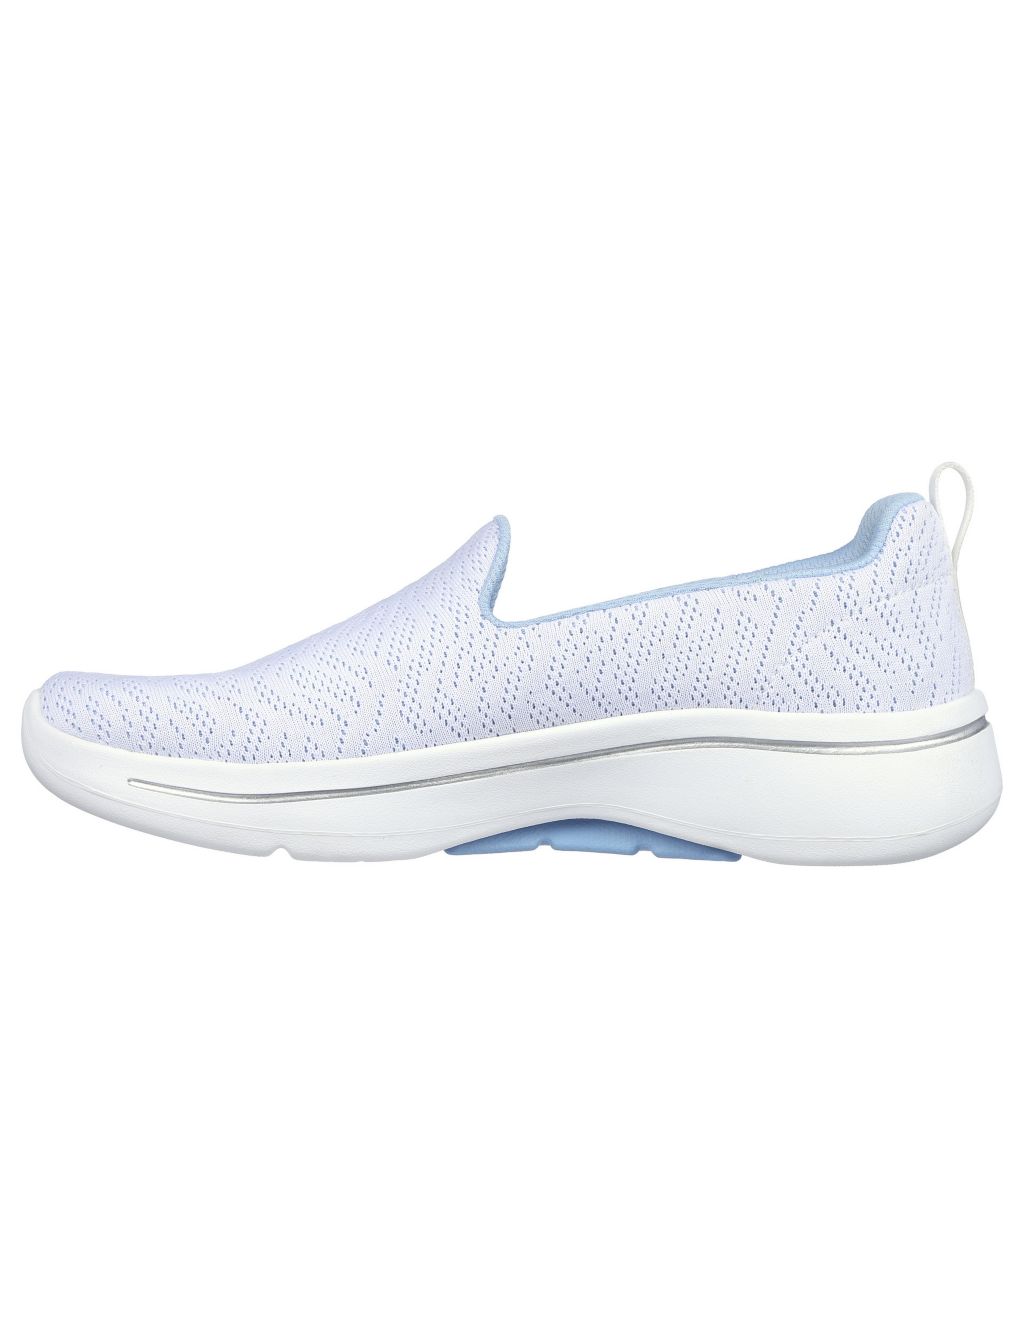 GOwalk Arch Fit Ocean Reef Knitted Trainers image 5